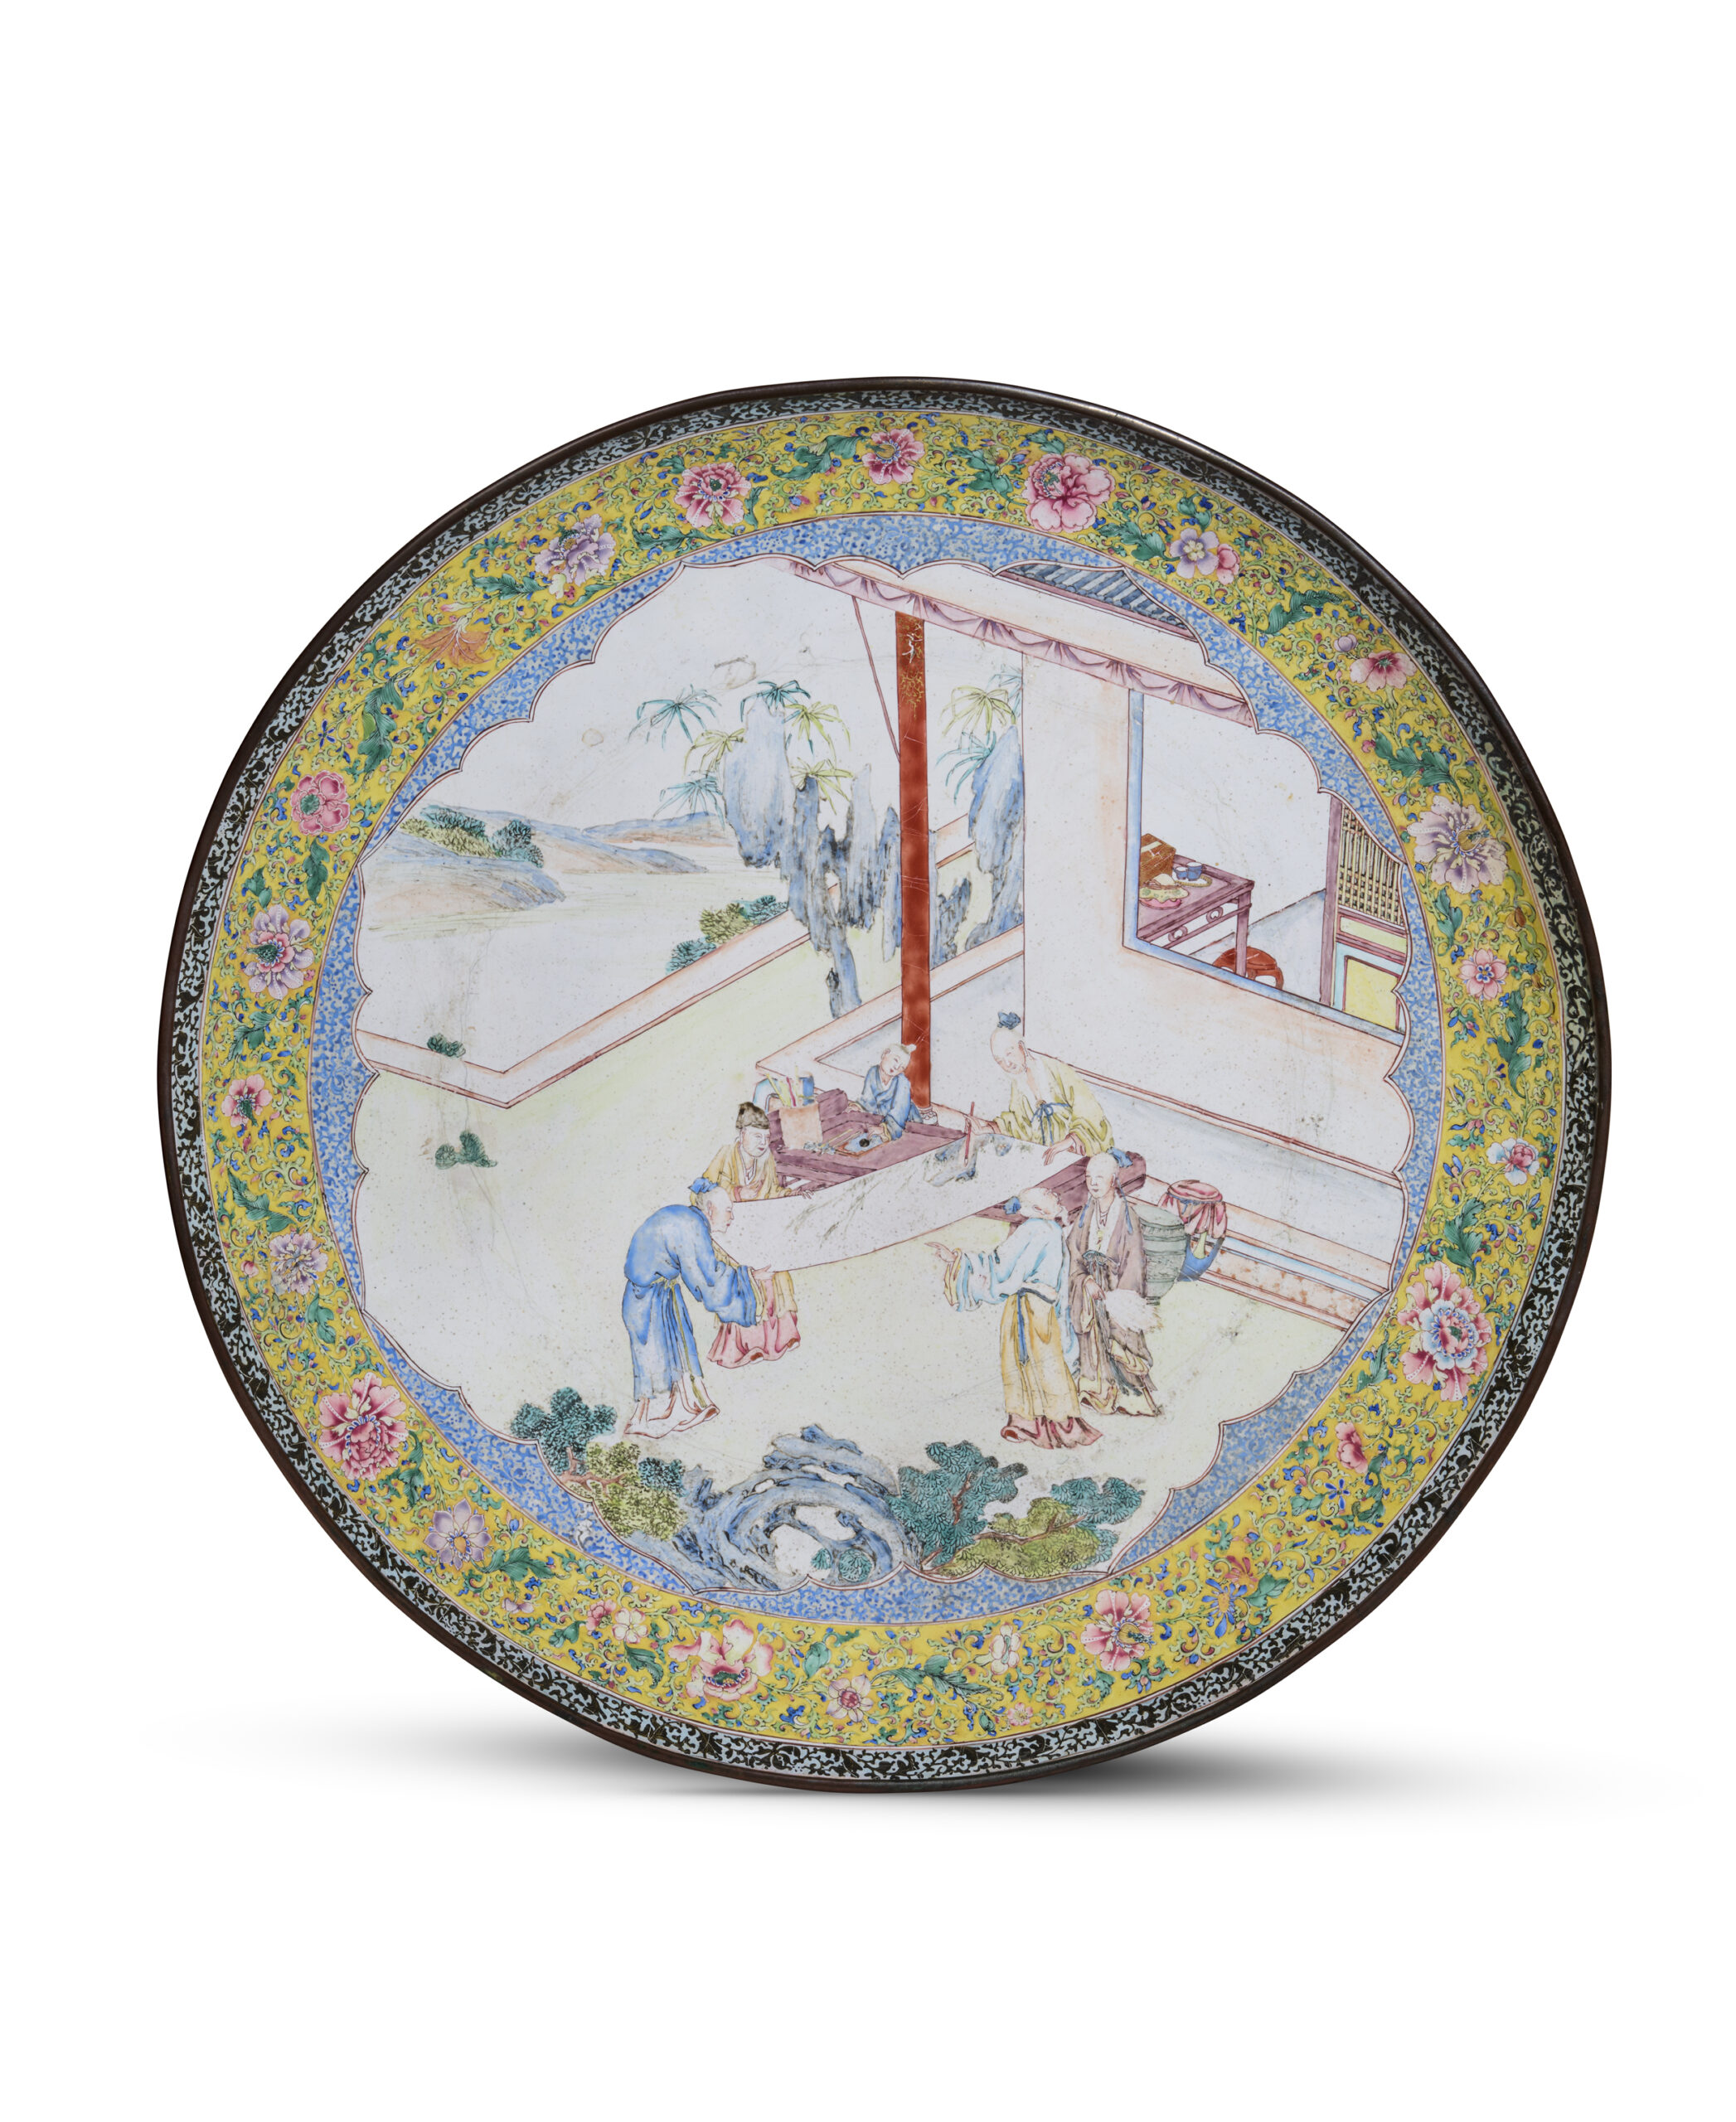 Canton Enamel Dish, Copper decorated in famille rose enamels, China - Qing dynasty, Qianlong period (1736-1795)